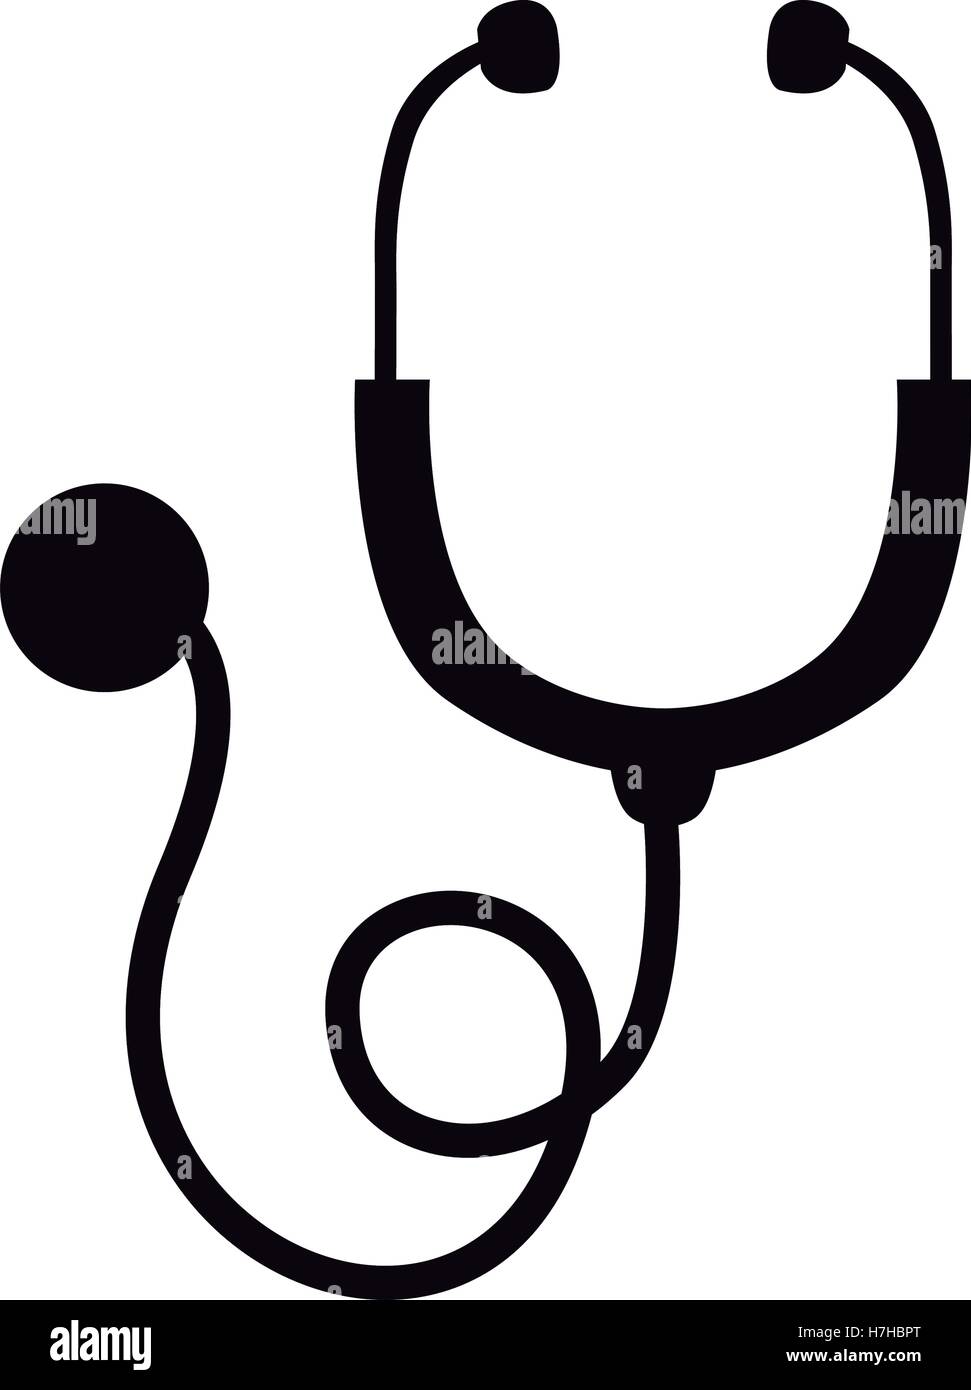 stethoscope medical tool icon over white background. vector illustration Stock Vector